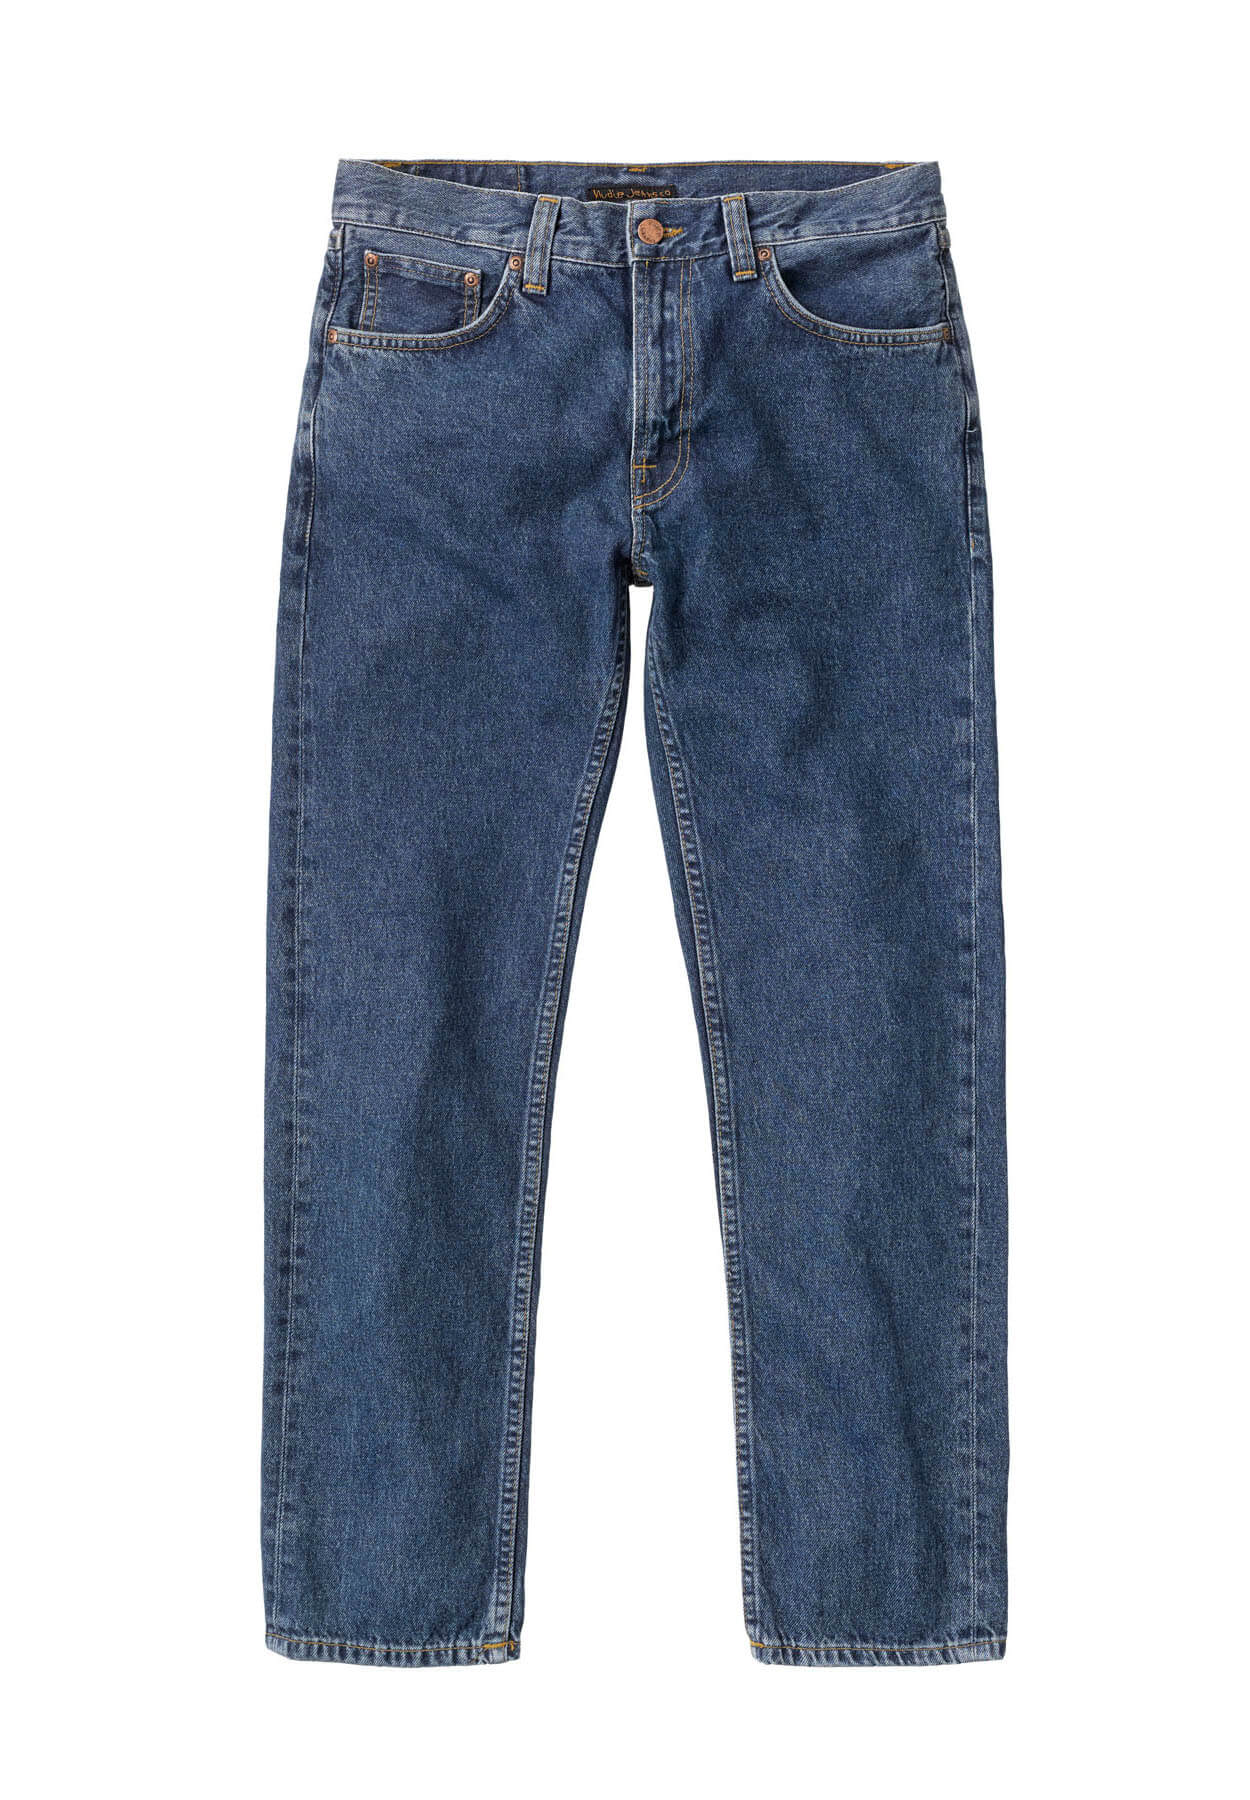 NUDIE JEANS Jeans Gritty Jackson 90s Stone 34/34